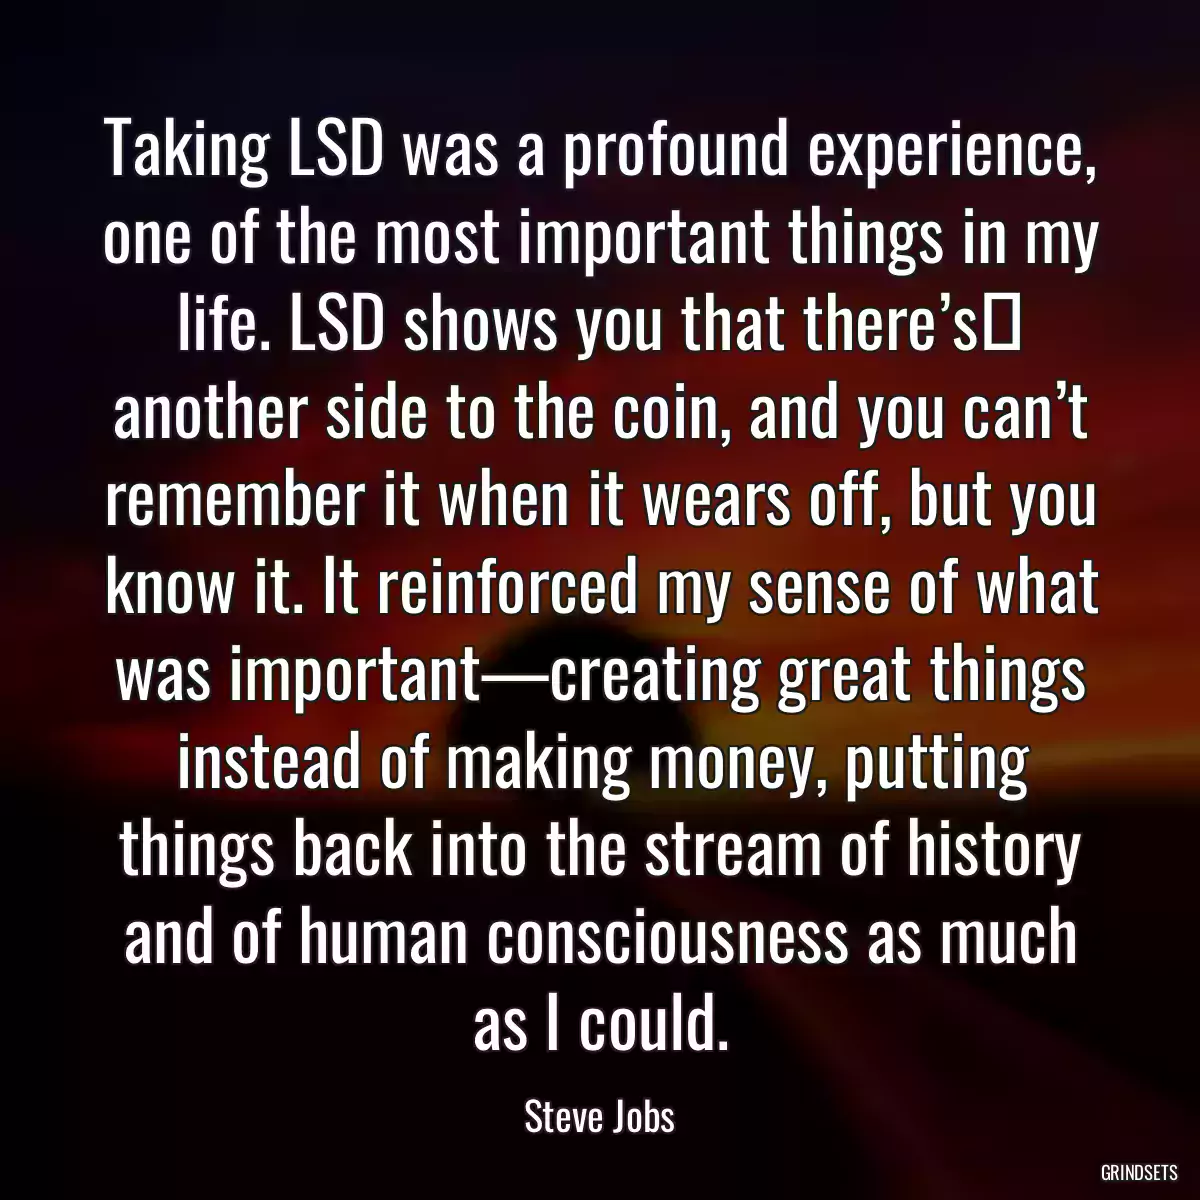 Taking LSD was a profound experience, one of the most important things in my life. LSD shows you that there’s﻿ another side to the coin, and you can’t remember it when it wears off, but you know it. It reinforced my sense of what was important—creating great things instead of making money, putting things back into the stream of history and of human consciousness as much as I could.